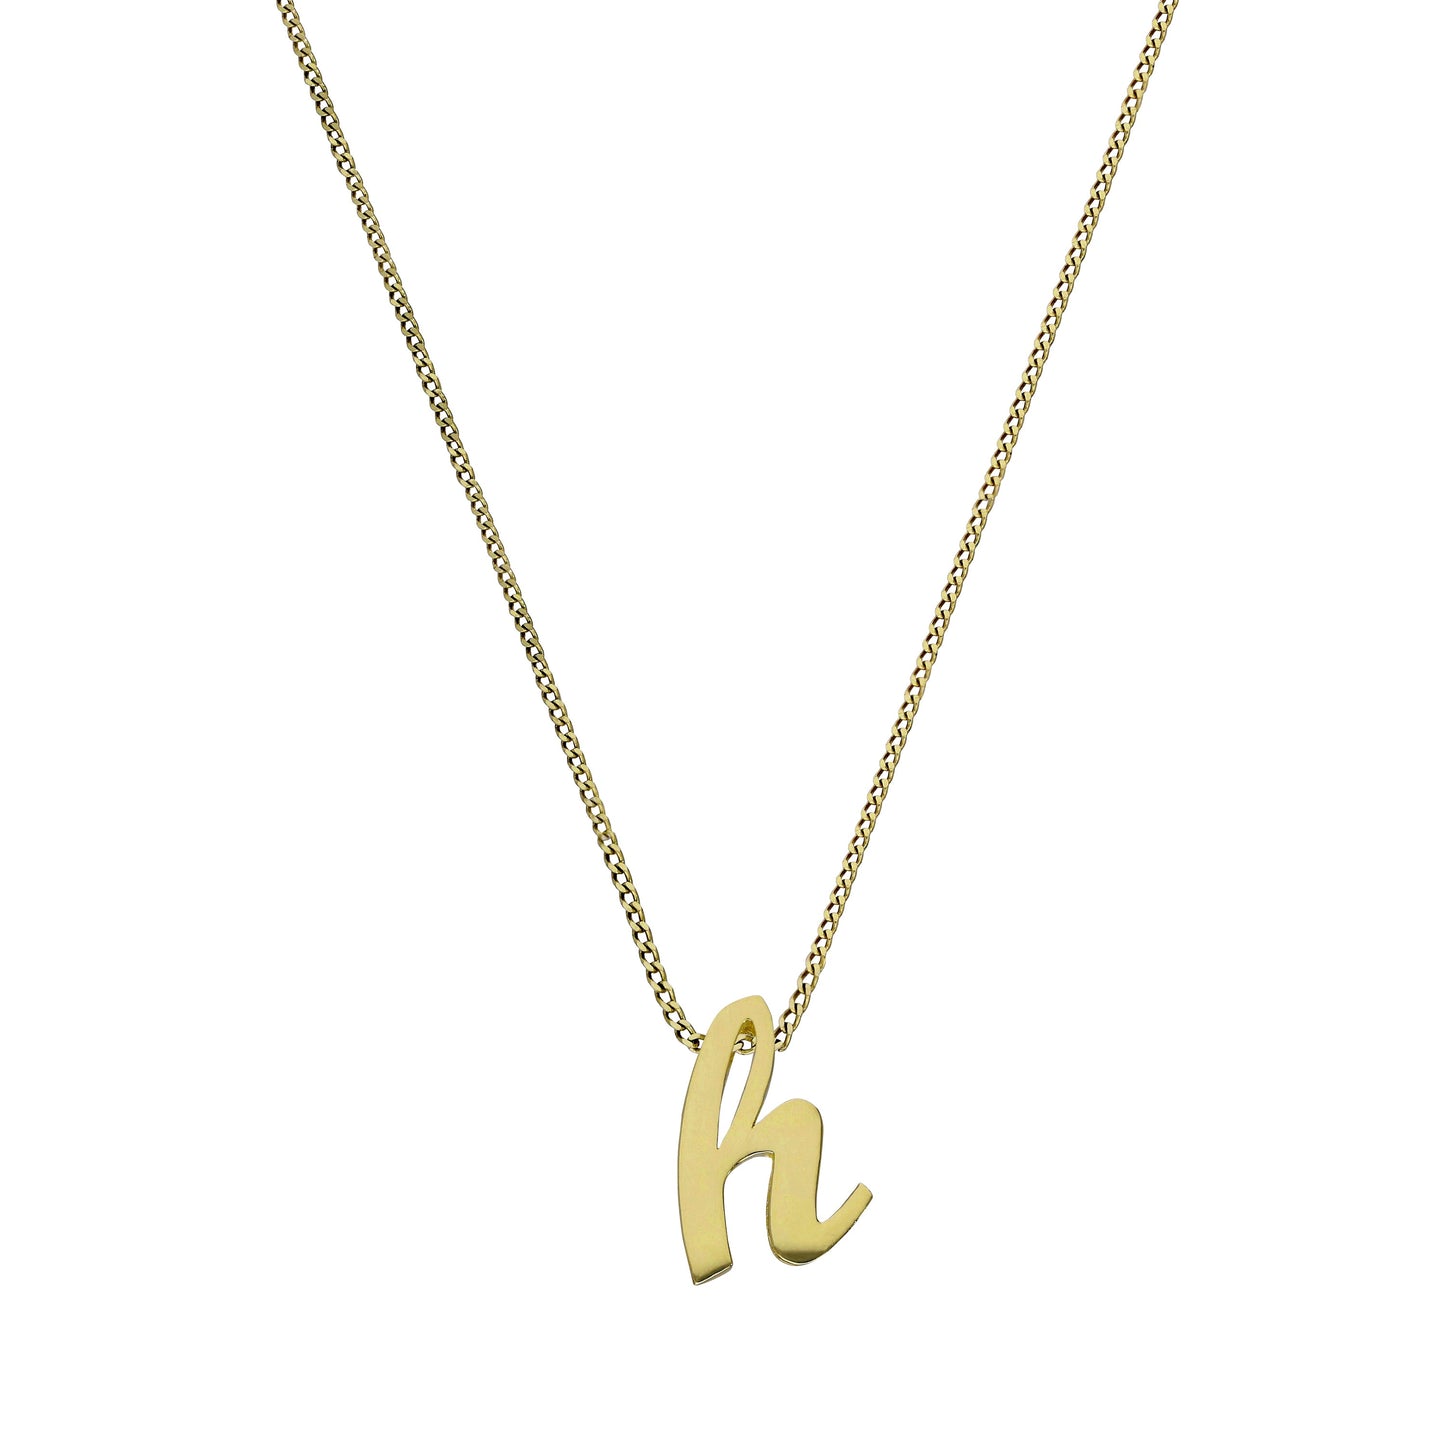 Tiny 9ct Gold Alphabet Letter H Pendant Necklace 16 - 20 Inches